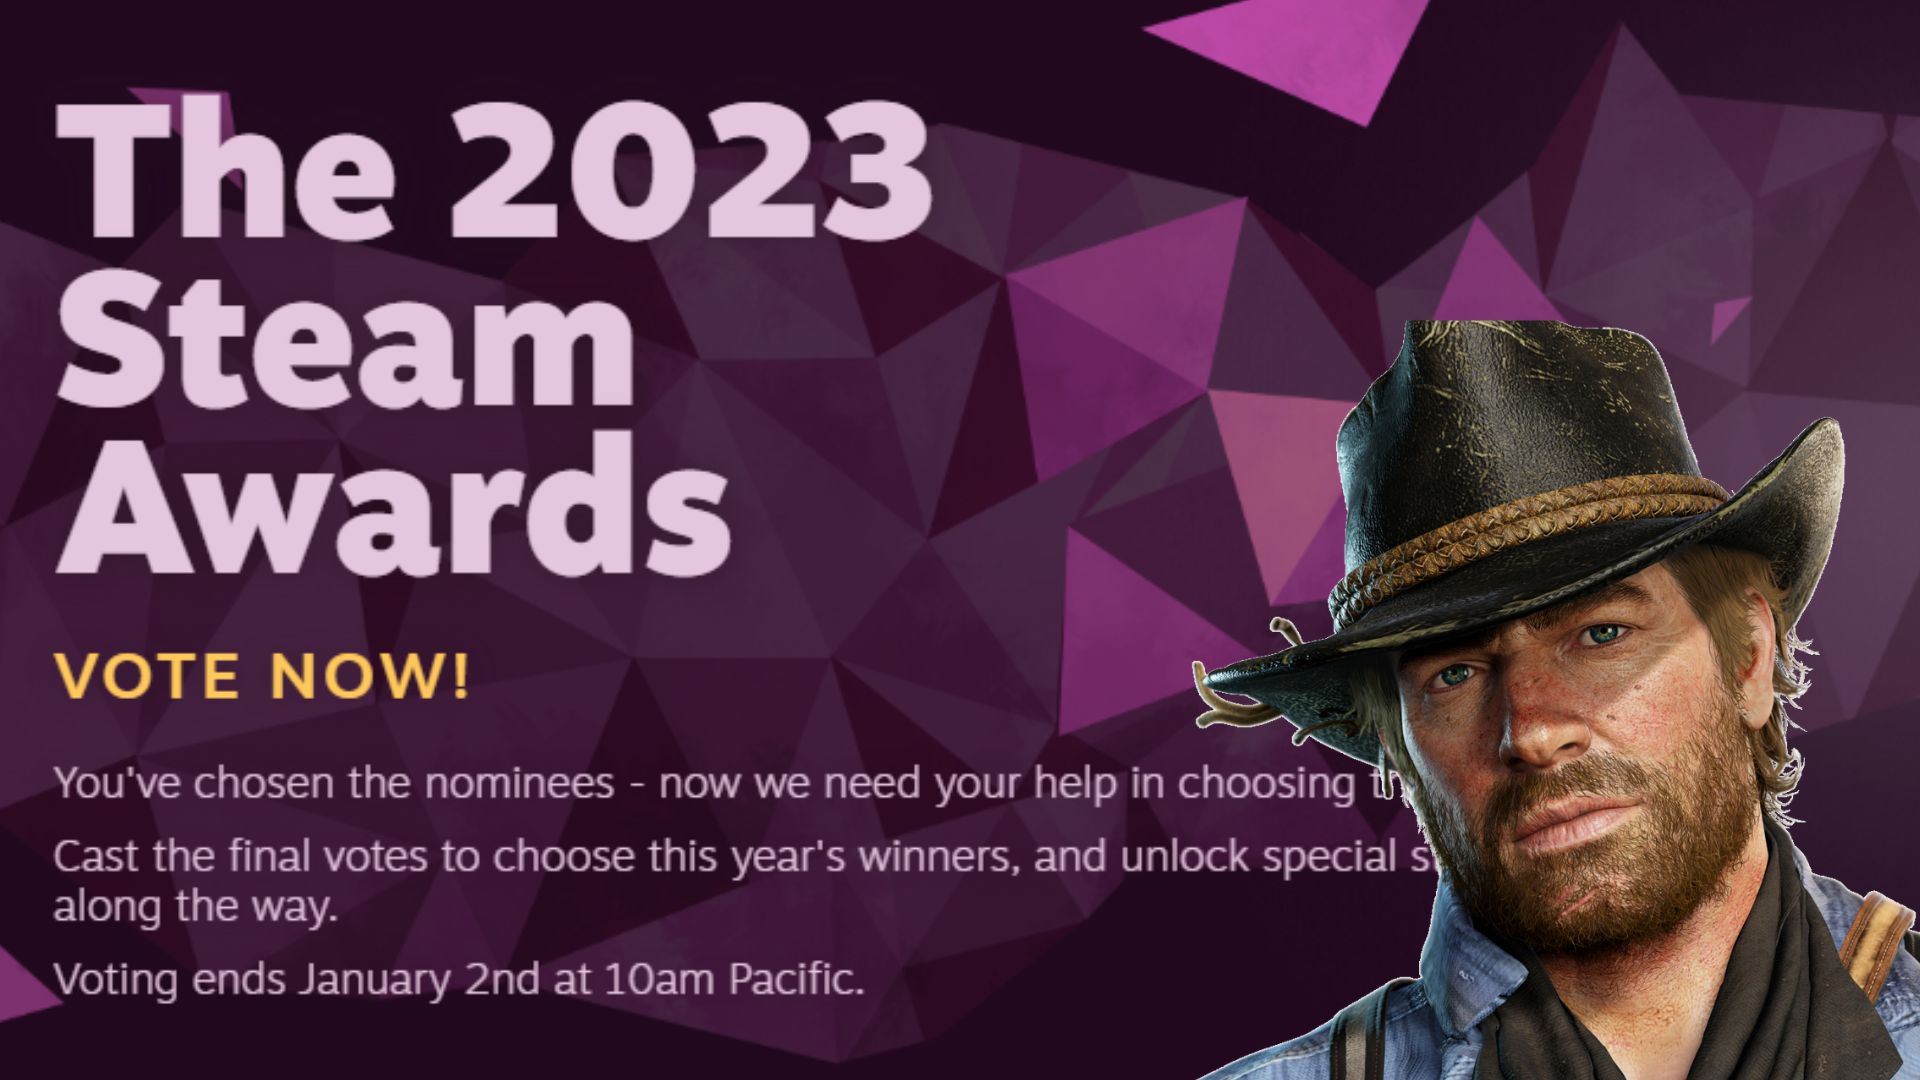 The Steam Awards 2023